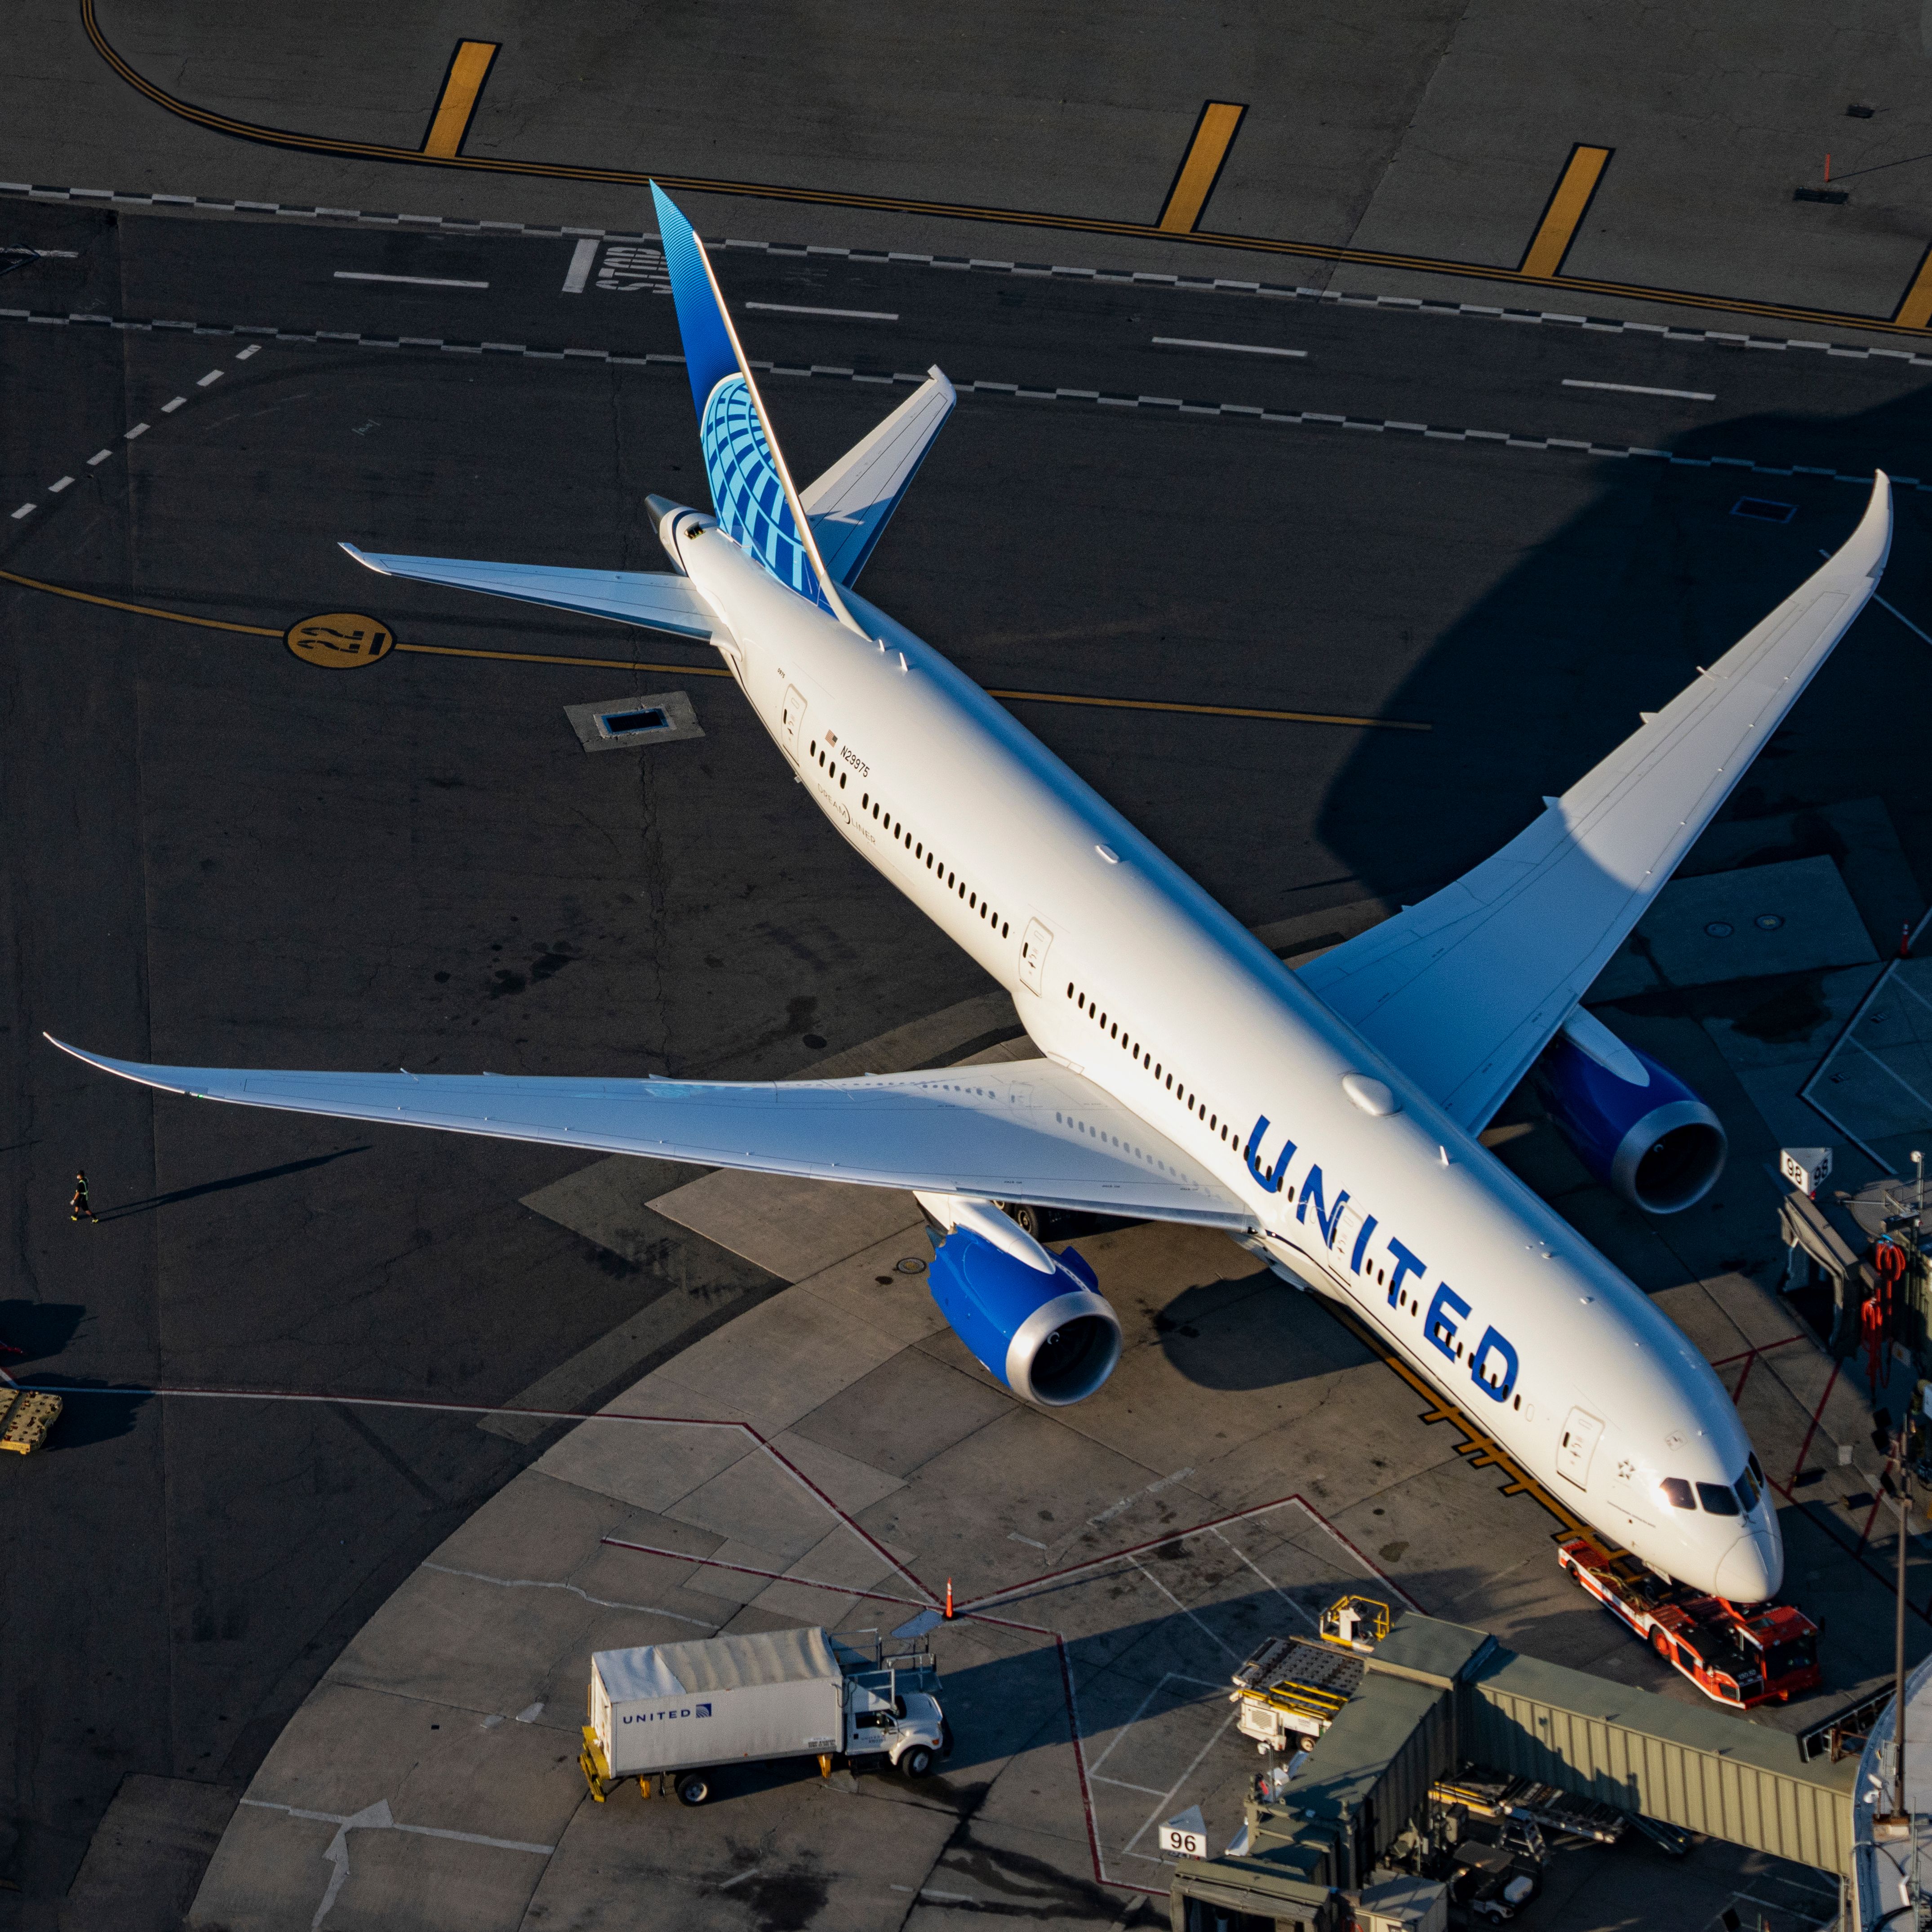 United Airlines Boeing 787-9 Dreamliner at the gate.